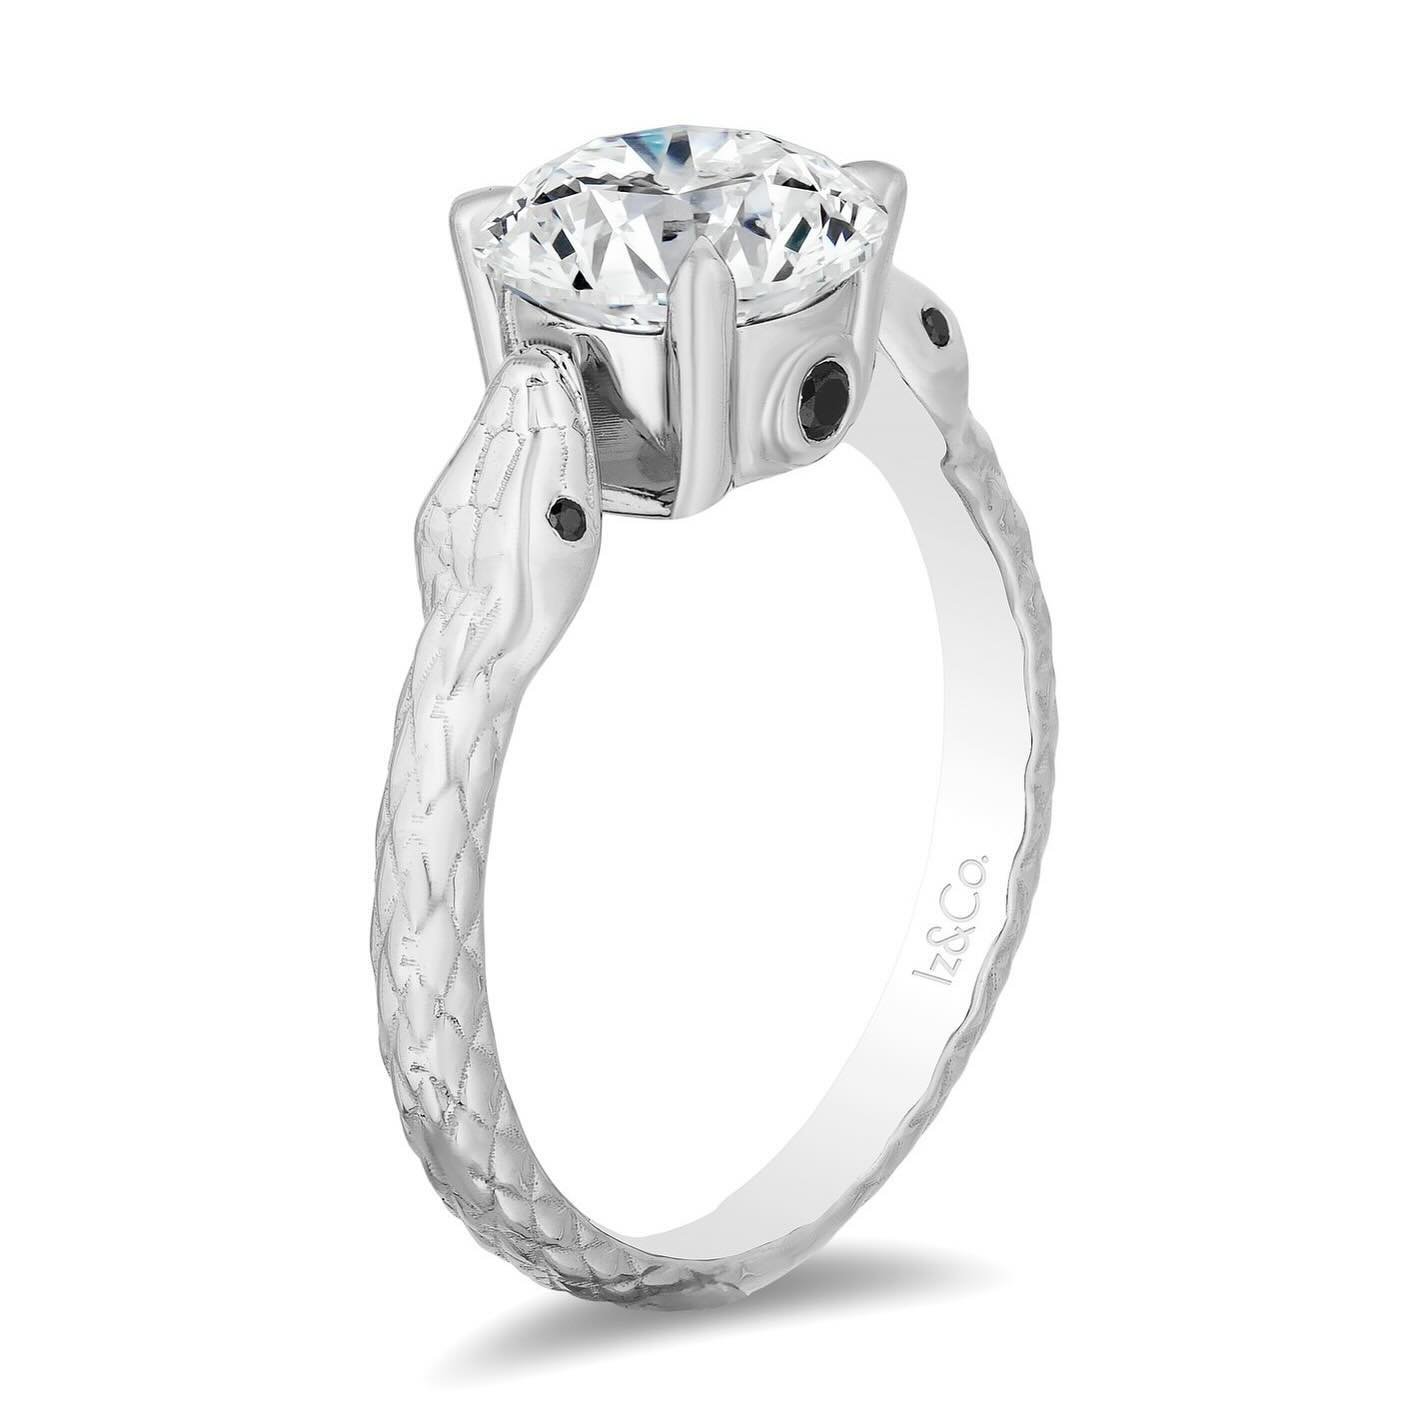 Captivate her with a touch of mystique. Introducing our stunning serpent diamond engagement ring &ndash; a symbol of eternal love and endless allure. Crafted with exquisite detail, this unique ring intertwines elegance and edginess that will make a s